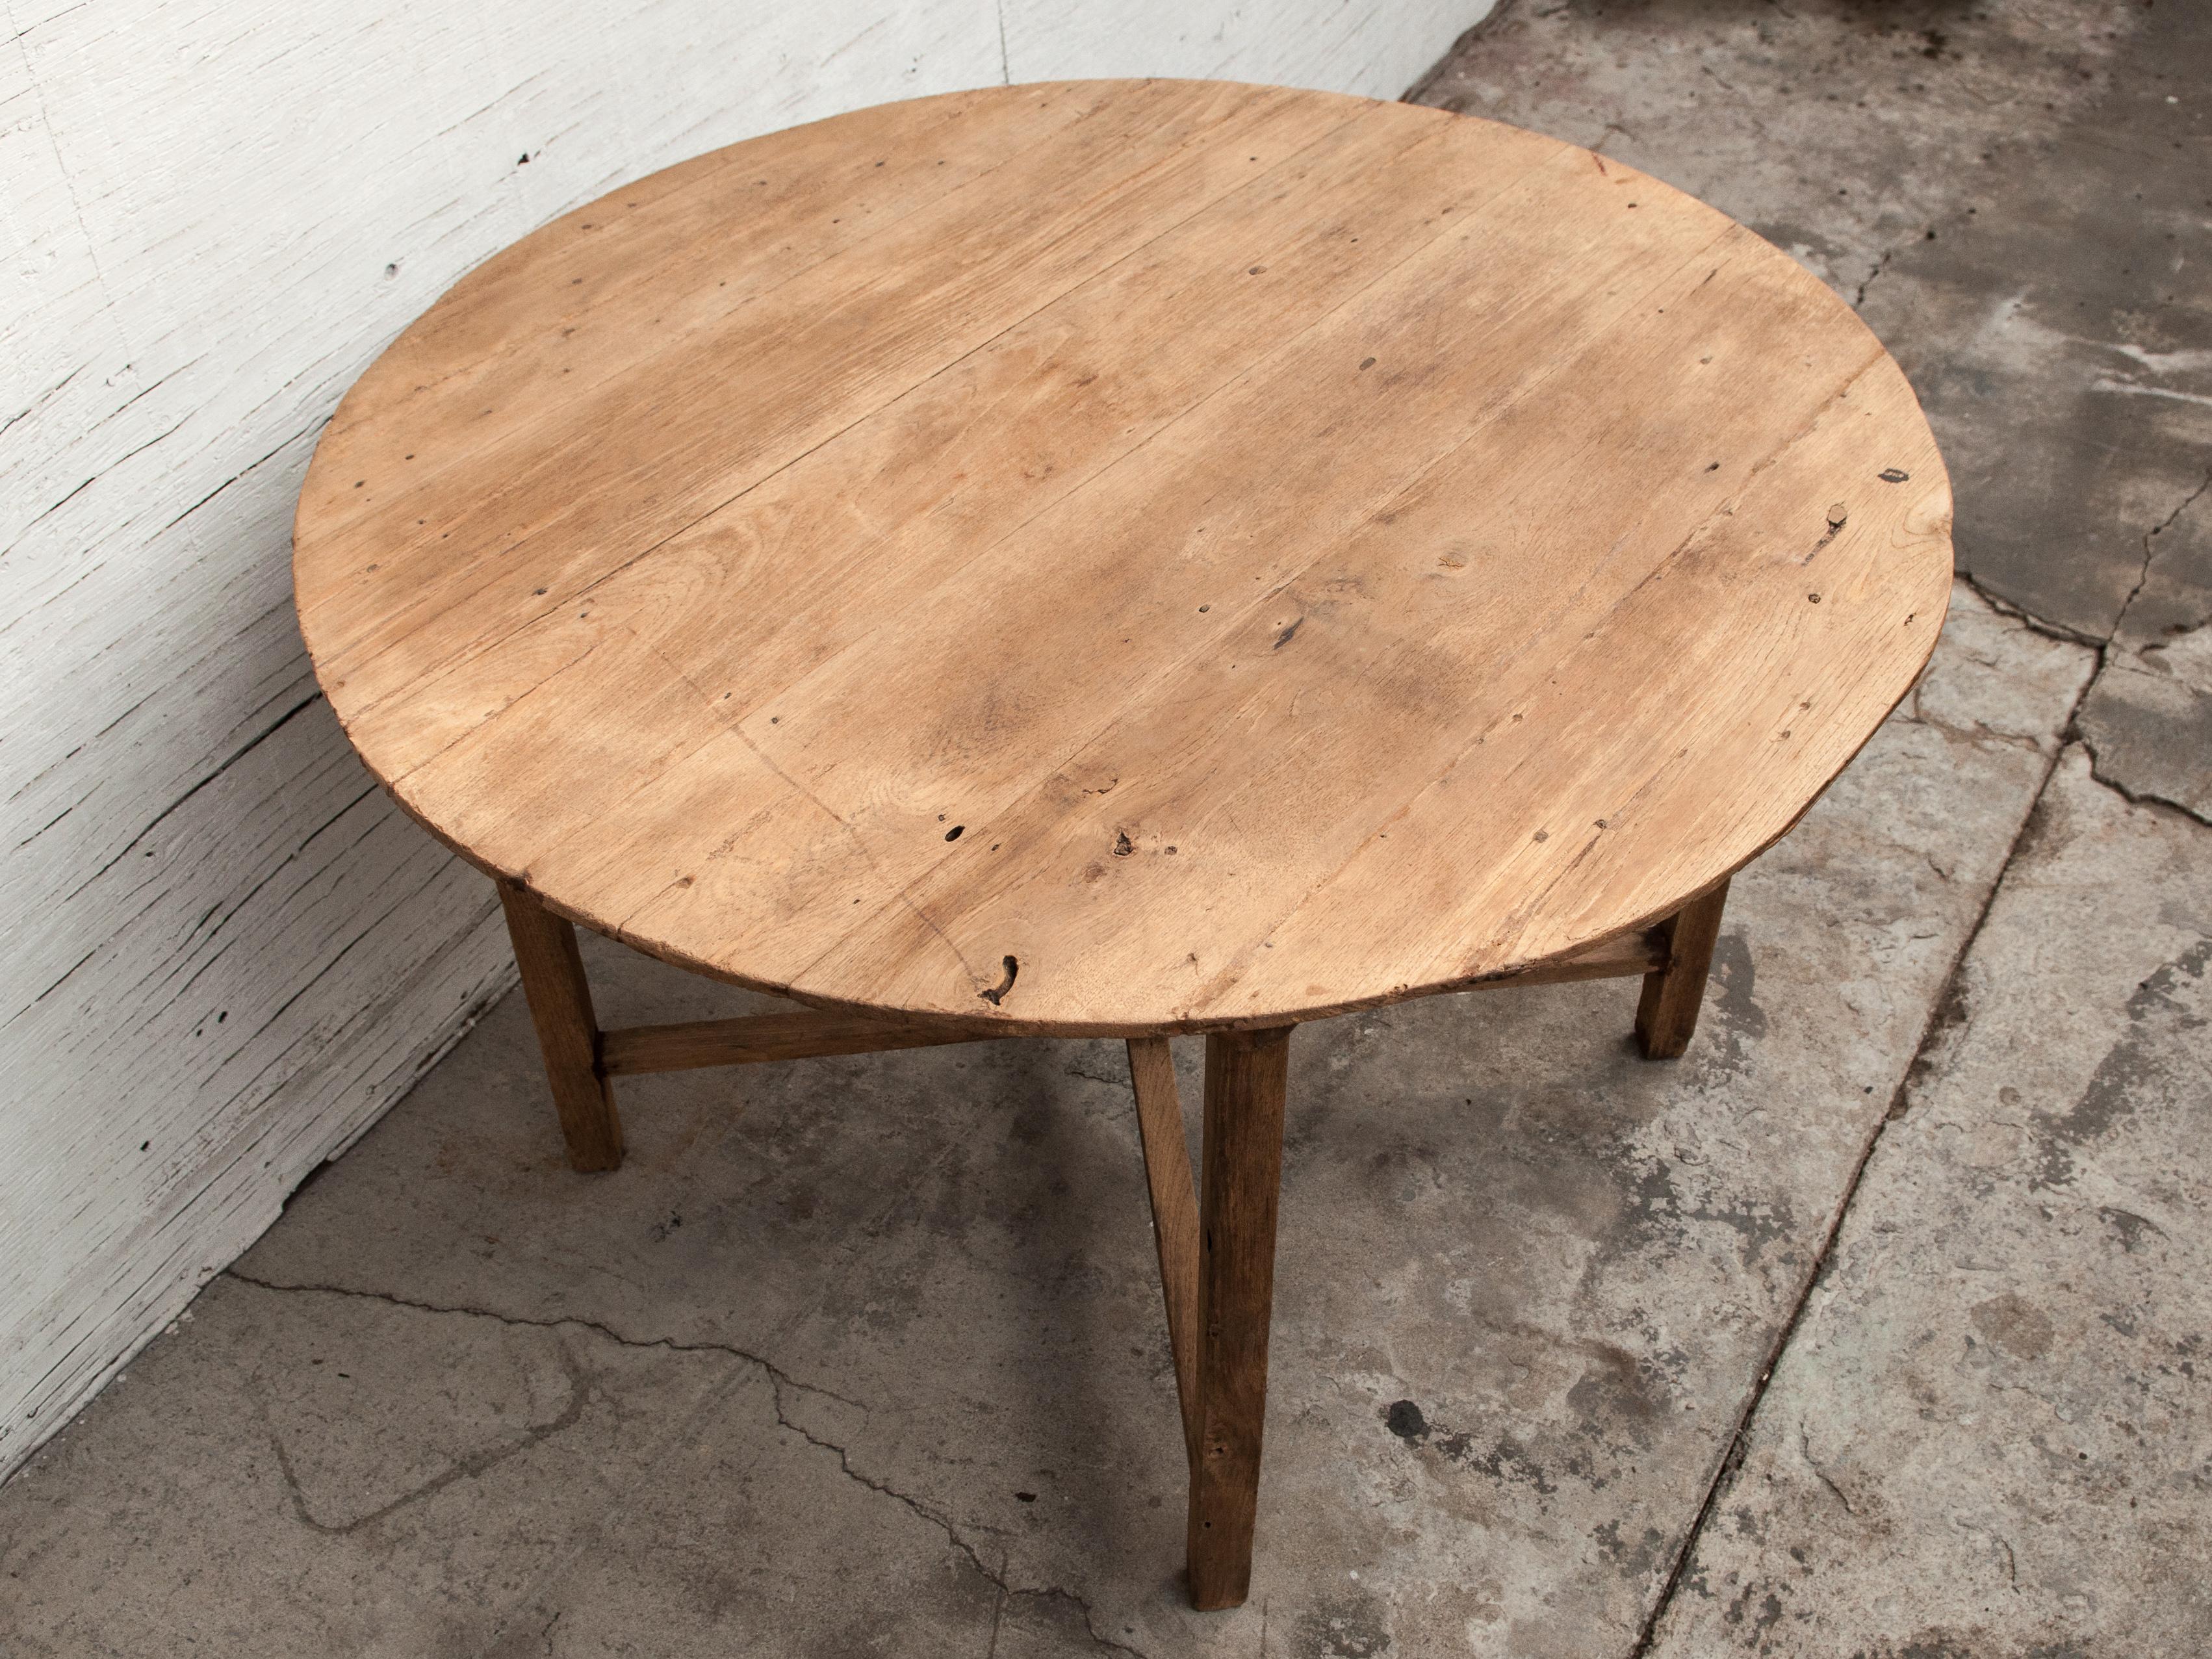 Vintage teak round table / farm table from Burma, mid-20th century.
This rustic teak round table comes from rural Burma.
Dimensions: 46 inch diameter by 29.5 inches tall.